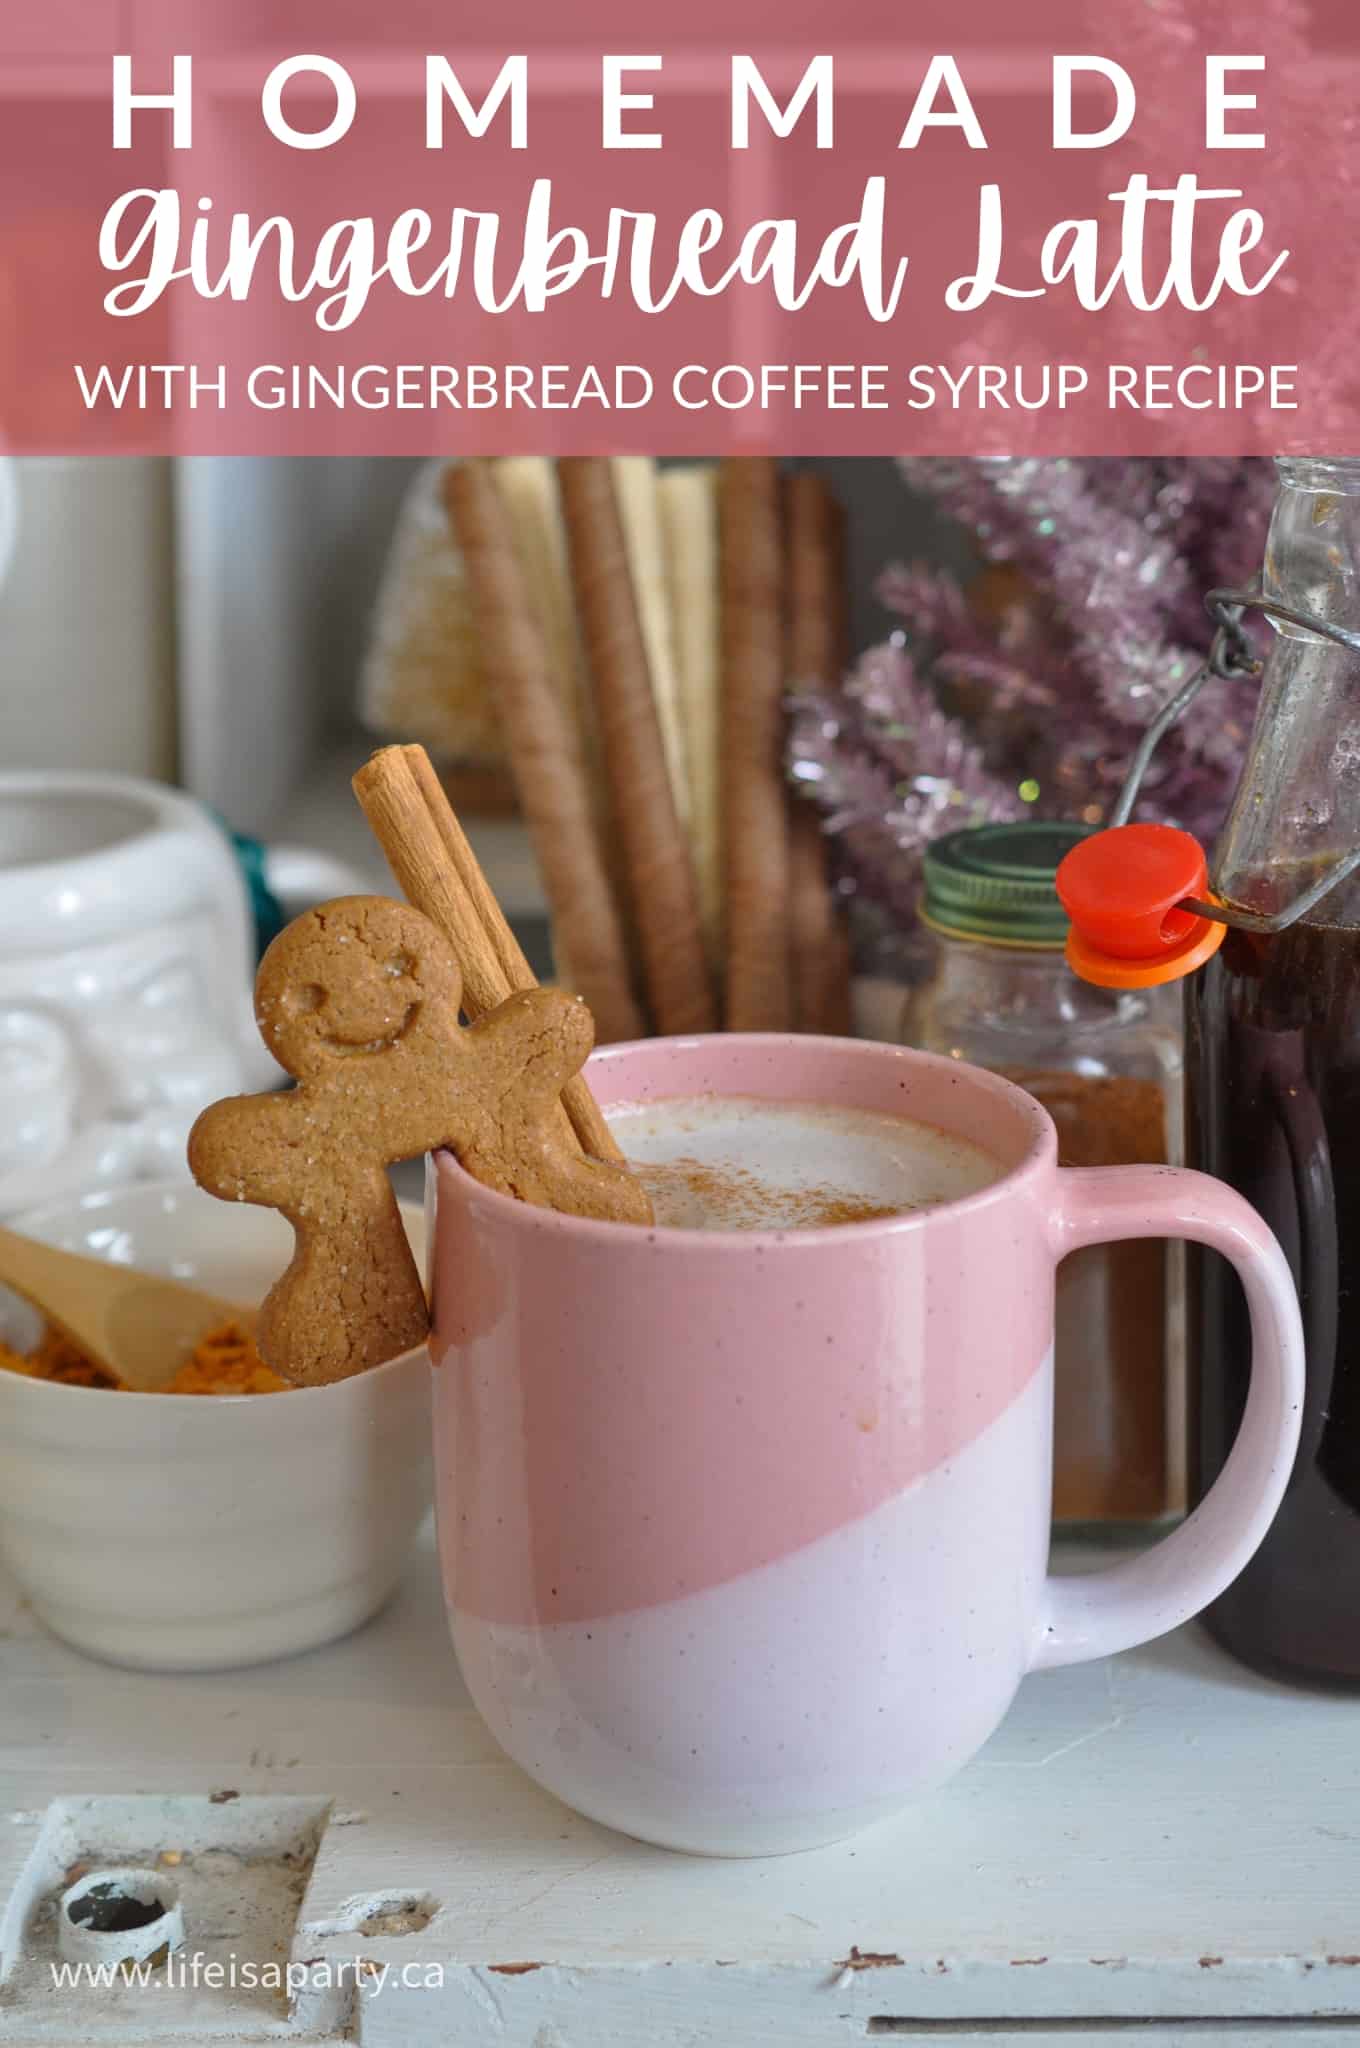 Homemade Gingerbread Latte: Copycat gingerbread latte Starbucks recipe with an easy homemade gingerbread coffee syrup recipe.